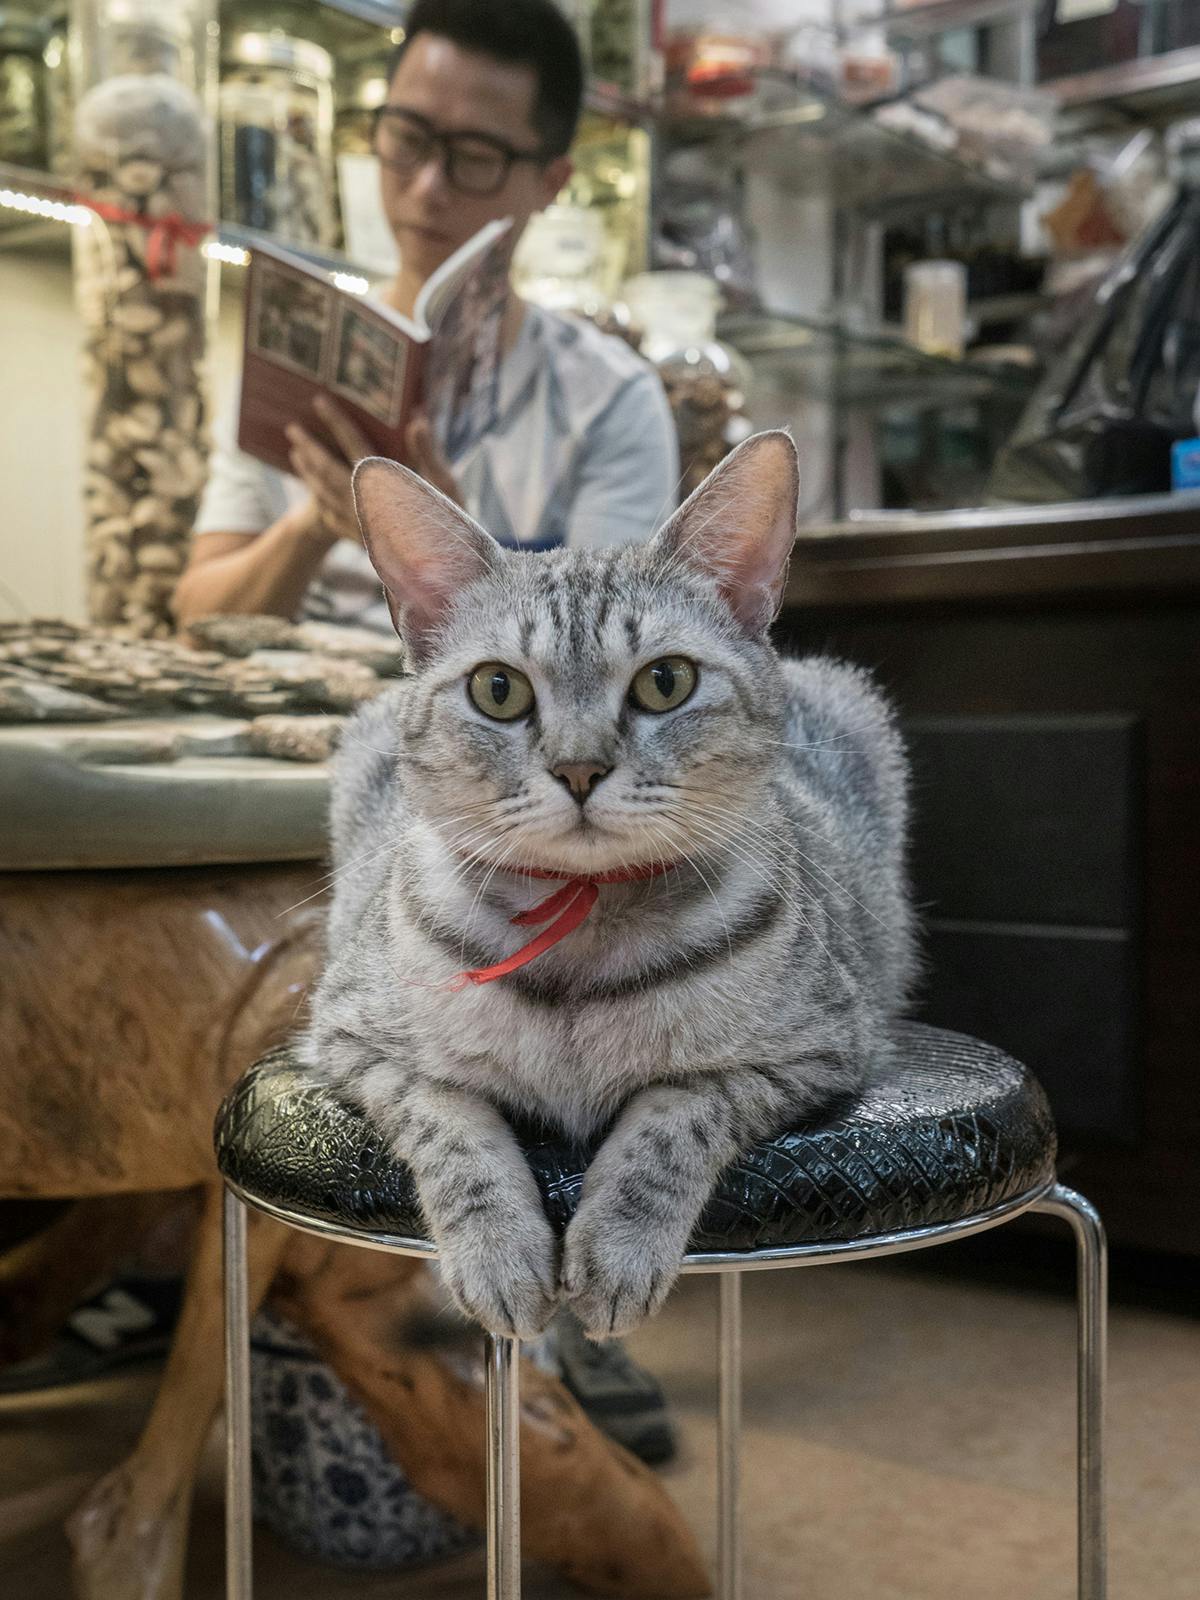 The shop cats of China get a starring role in new book